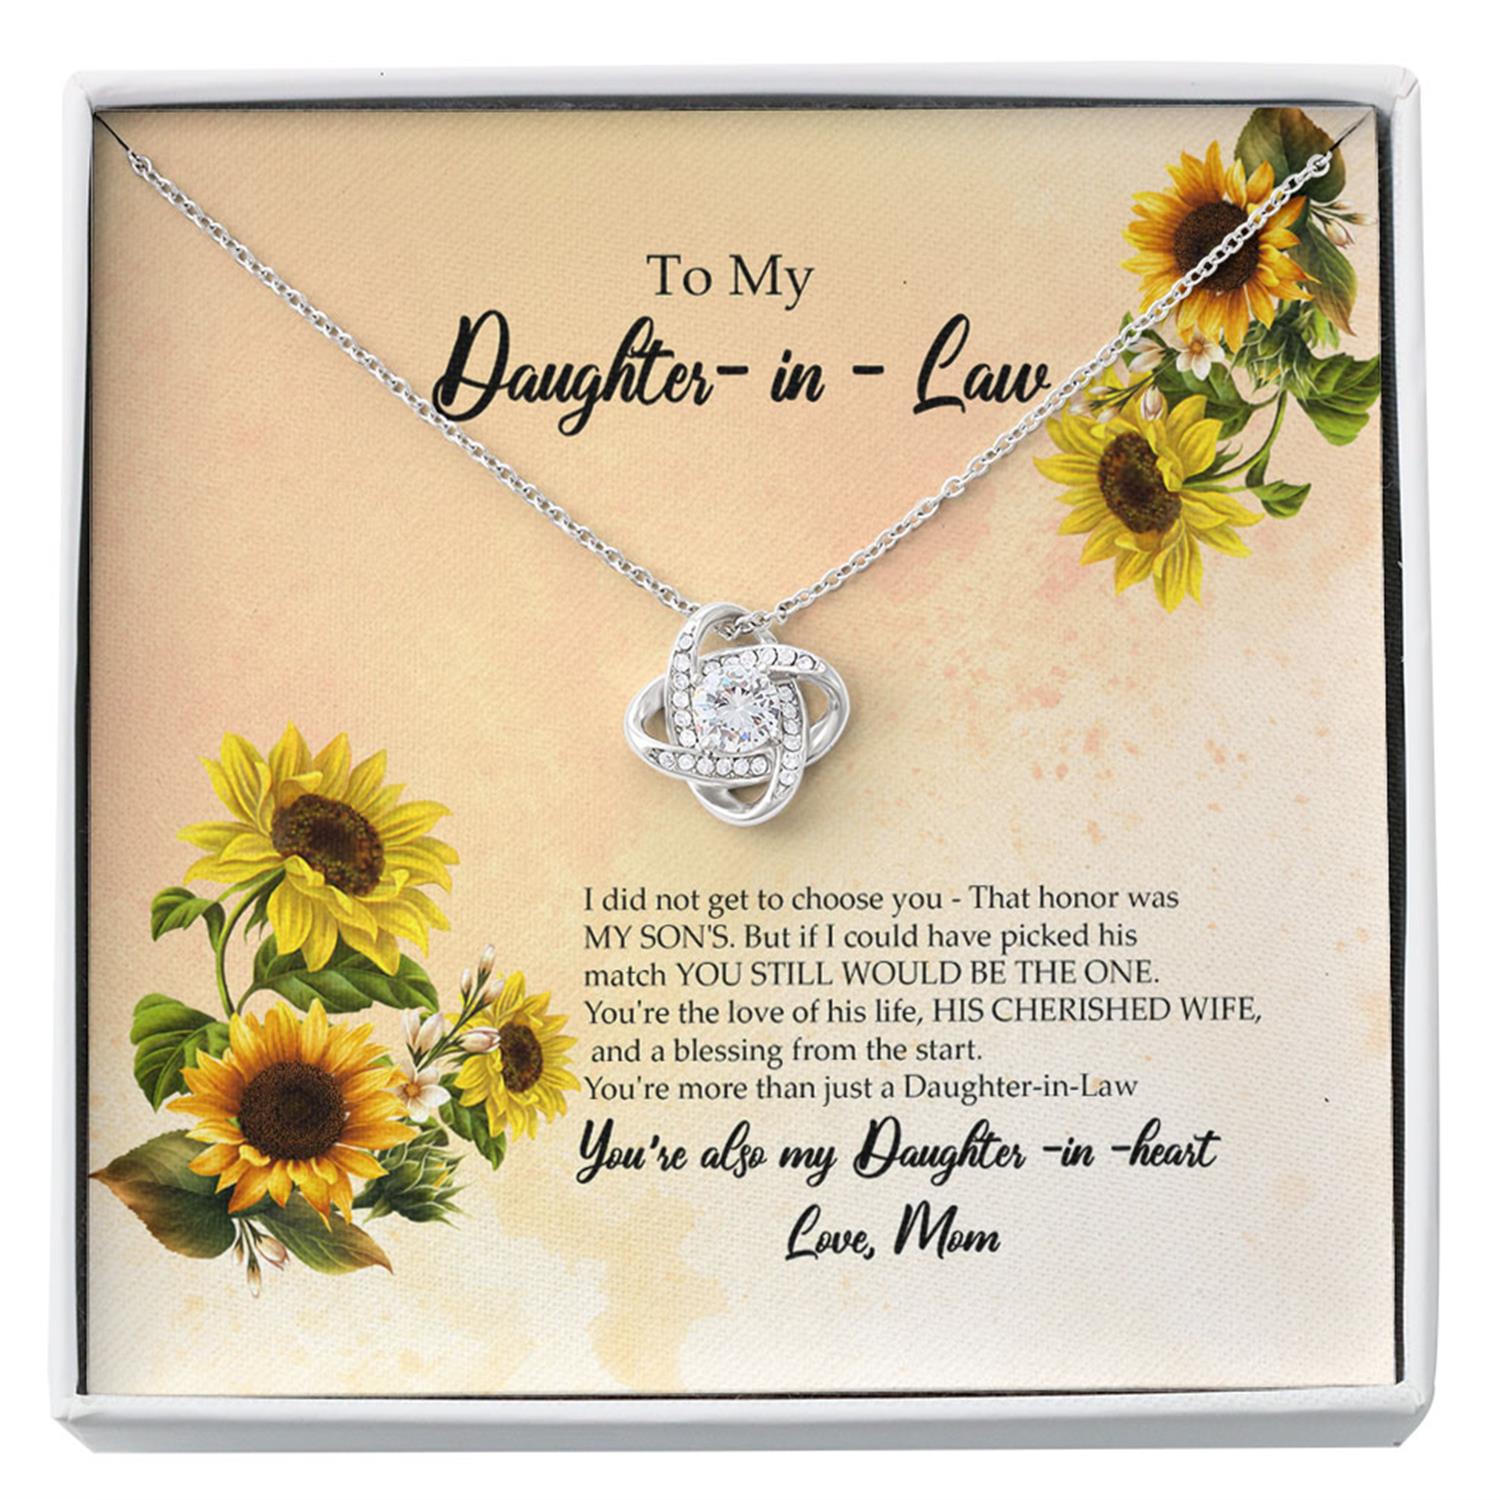 Daughter-in-law Necklace, To My Daughter-in-Law Necklace Wedding Gift From Mother-in-Law Custom Necklace